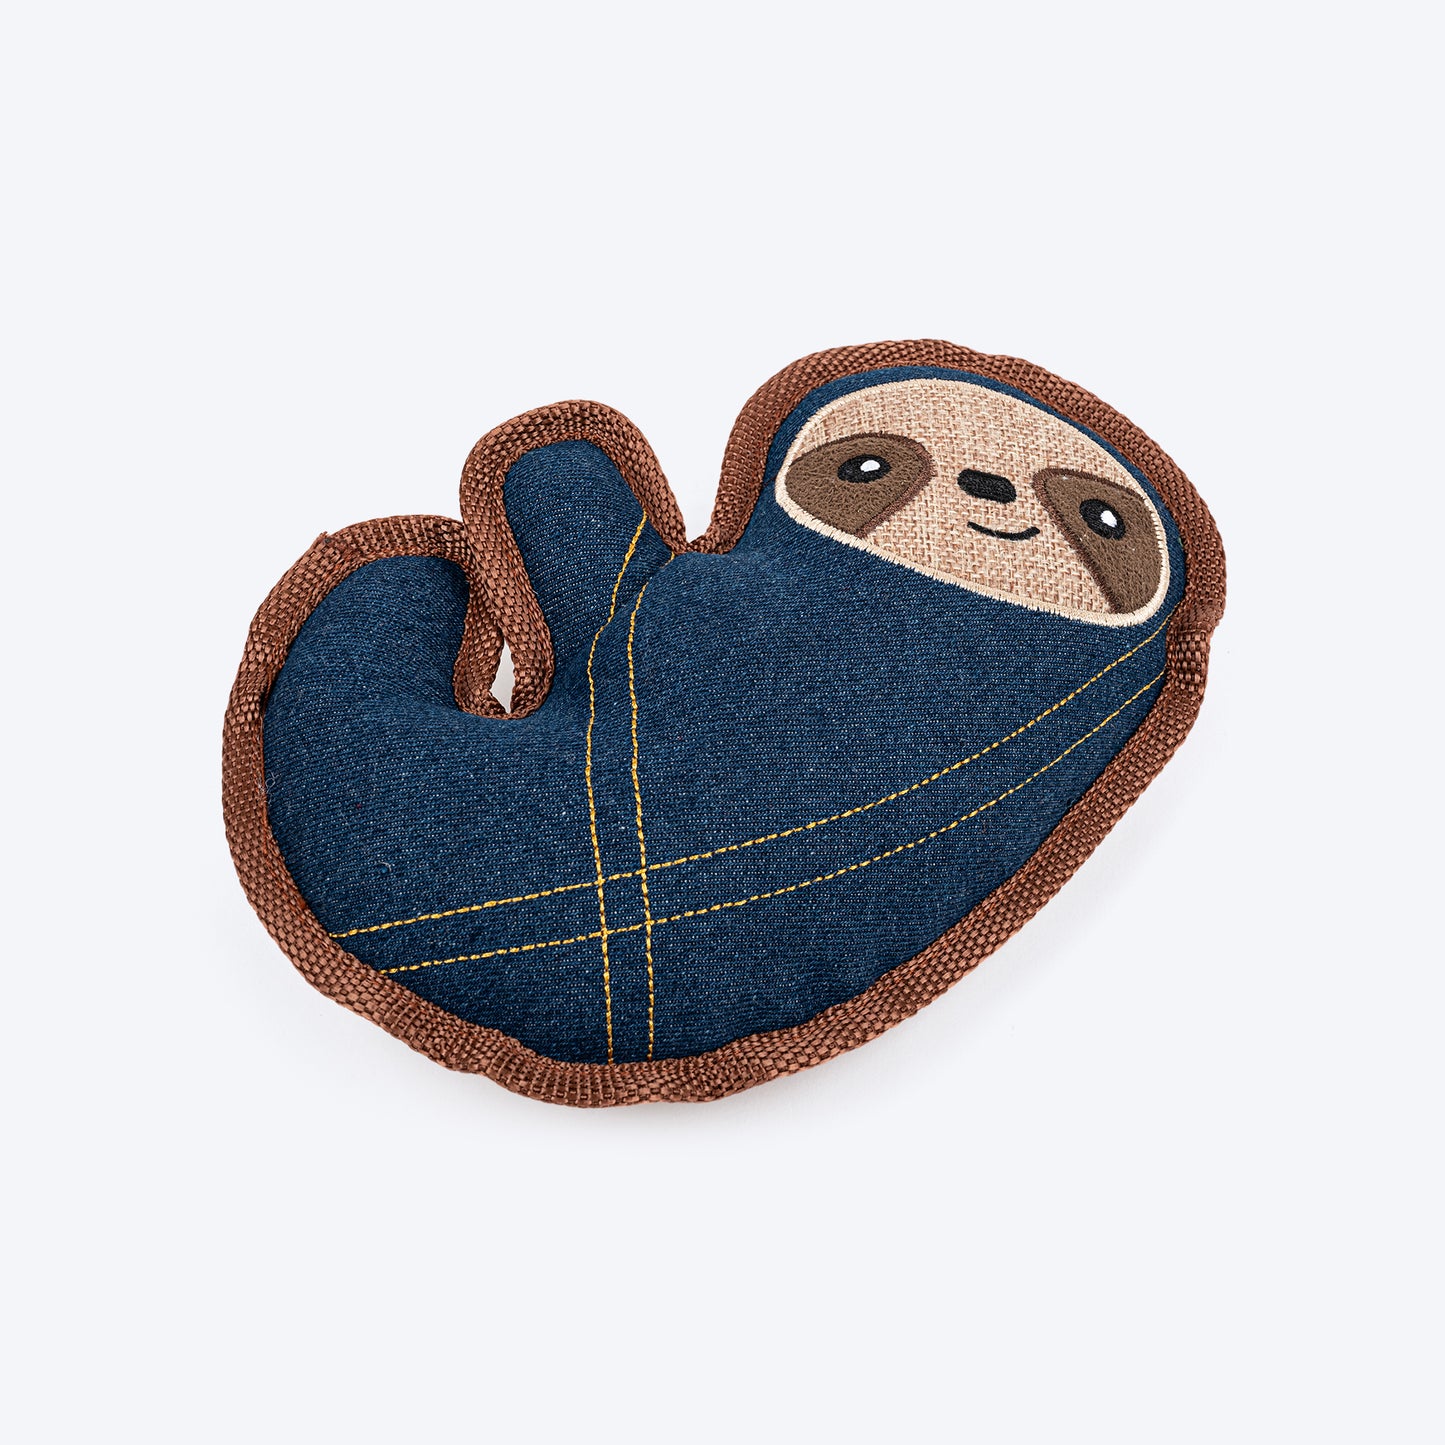 HUFT Jean Sloth Plush Toy For Dog - Navy Blue - Heads Up For Tails